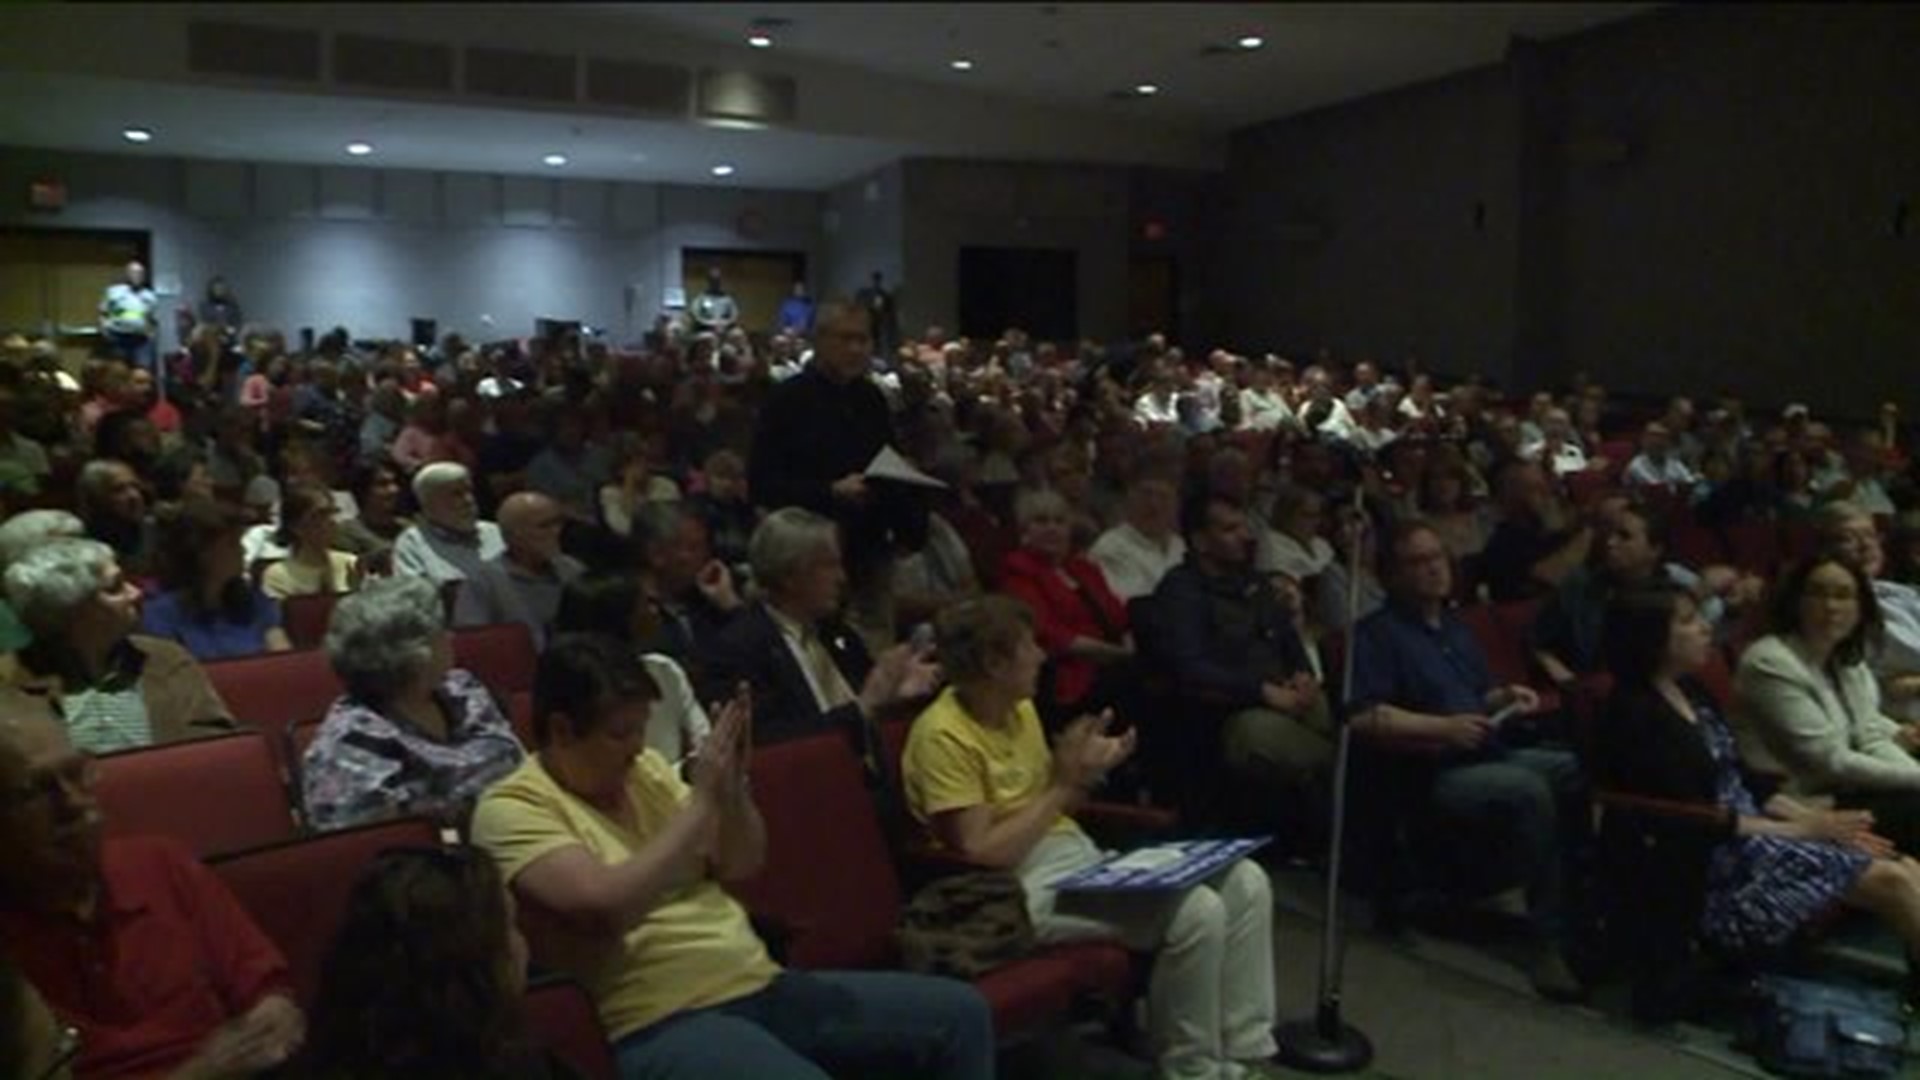 Hundreds turn out for meeting on crumbling foundations